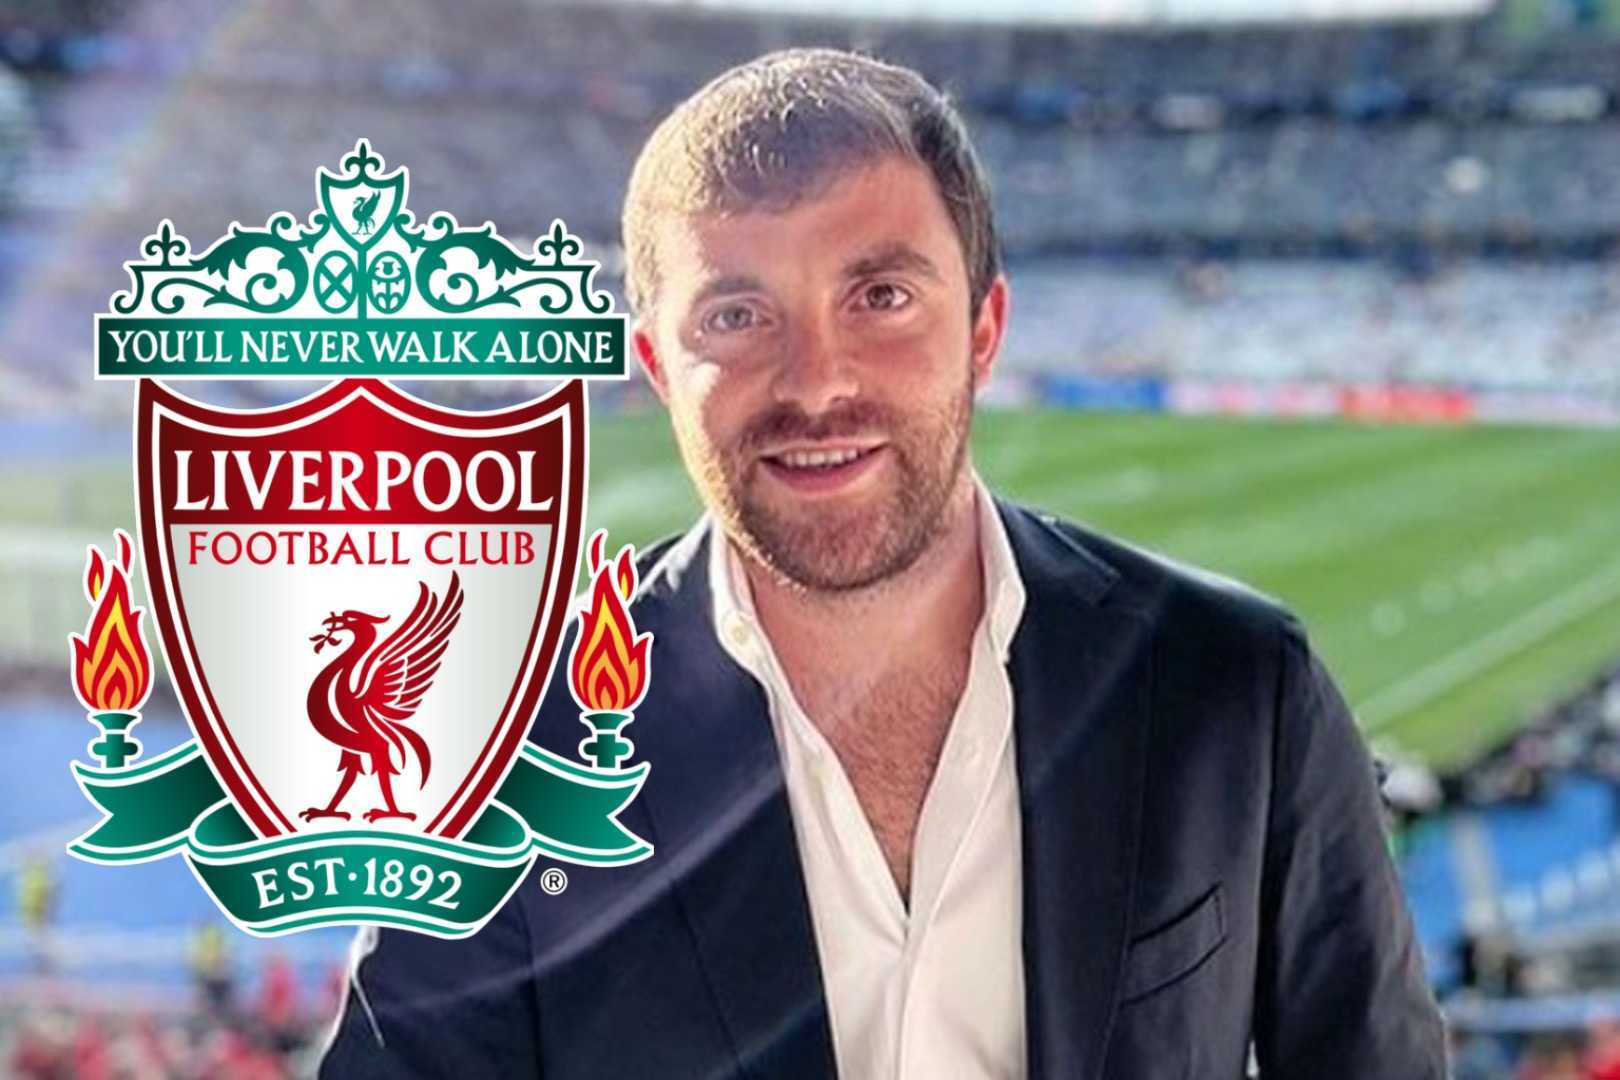 Not Amorim: Second Liverpool meeting ‘already scheduled’ with 45-y/o coach, says Fabrizio Romano